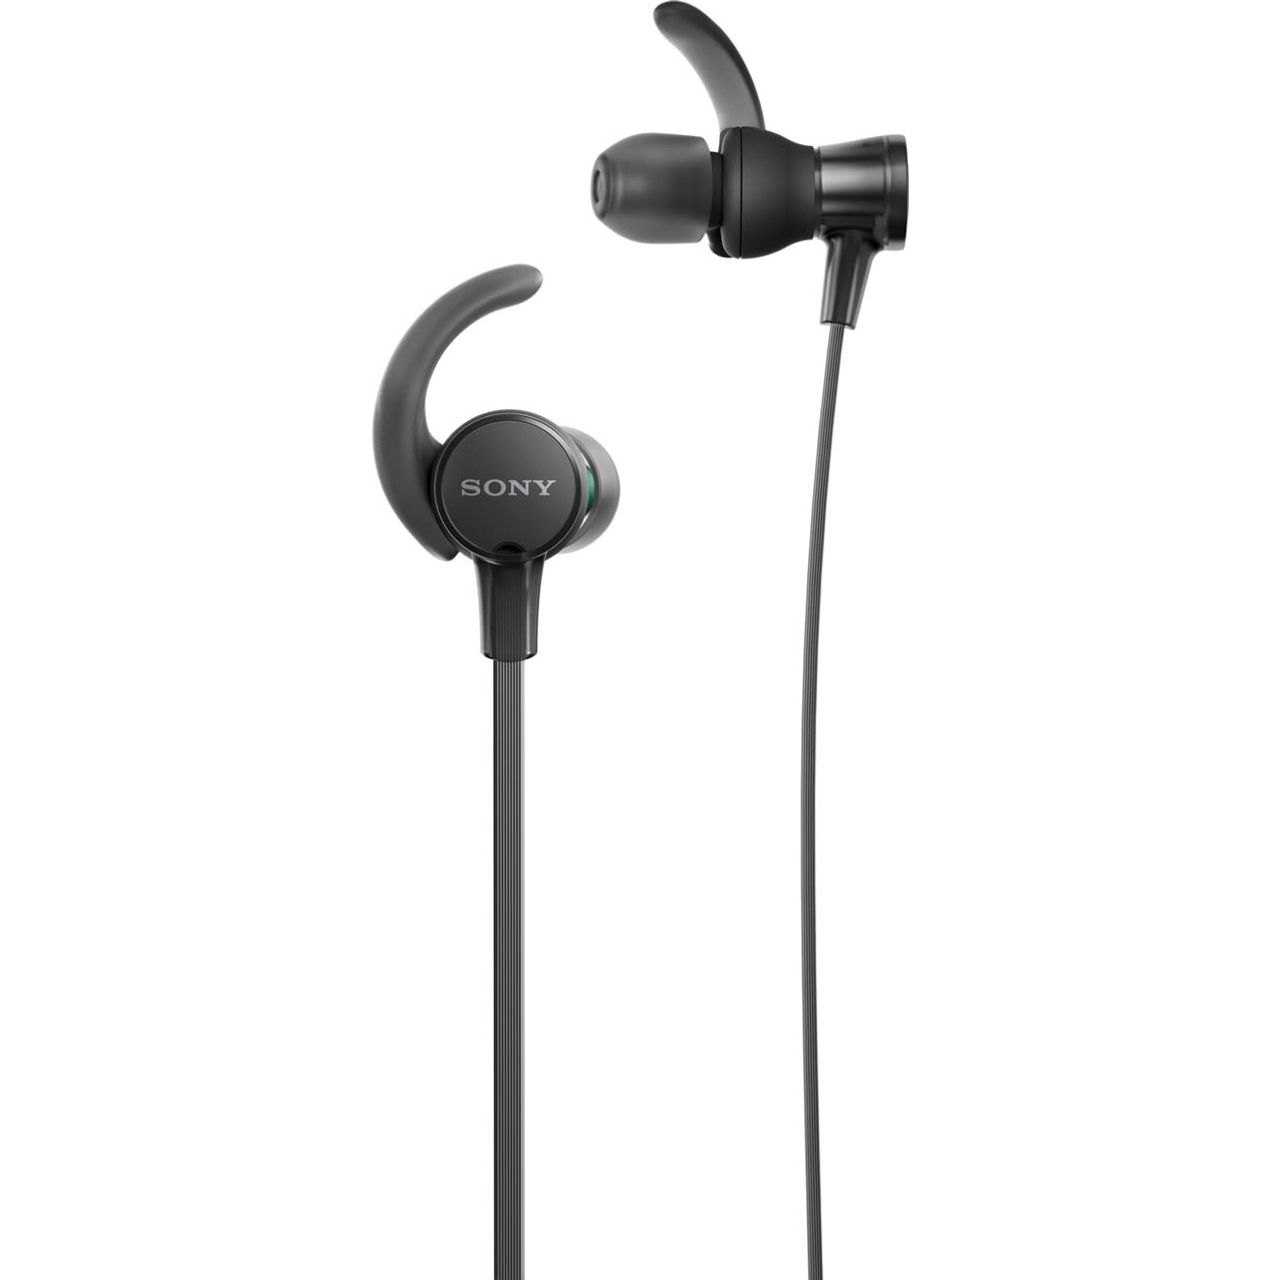 Sony MDRXB510ASB In-Ear Sports Headphones Review